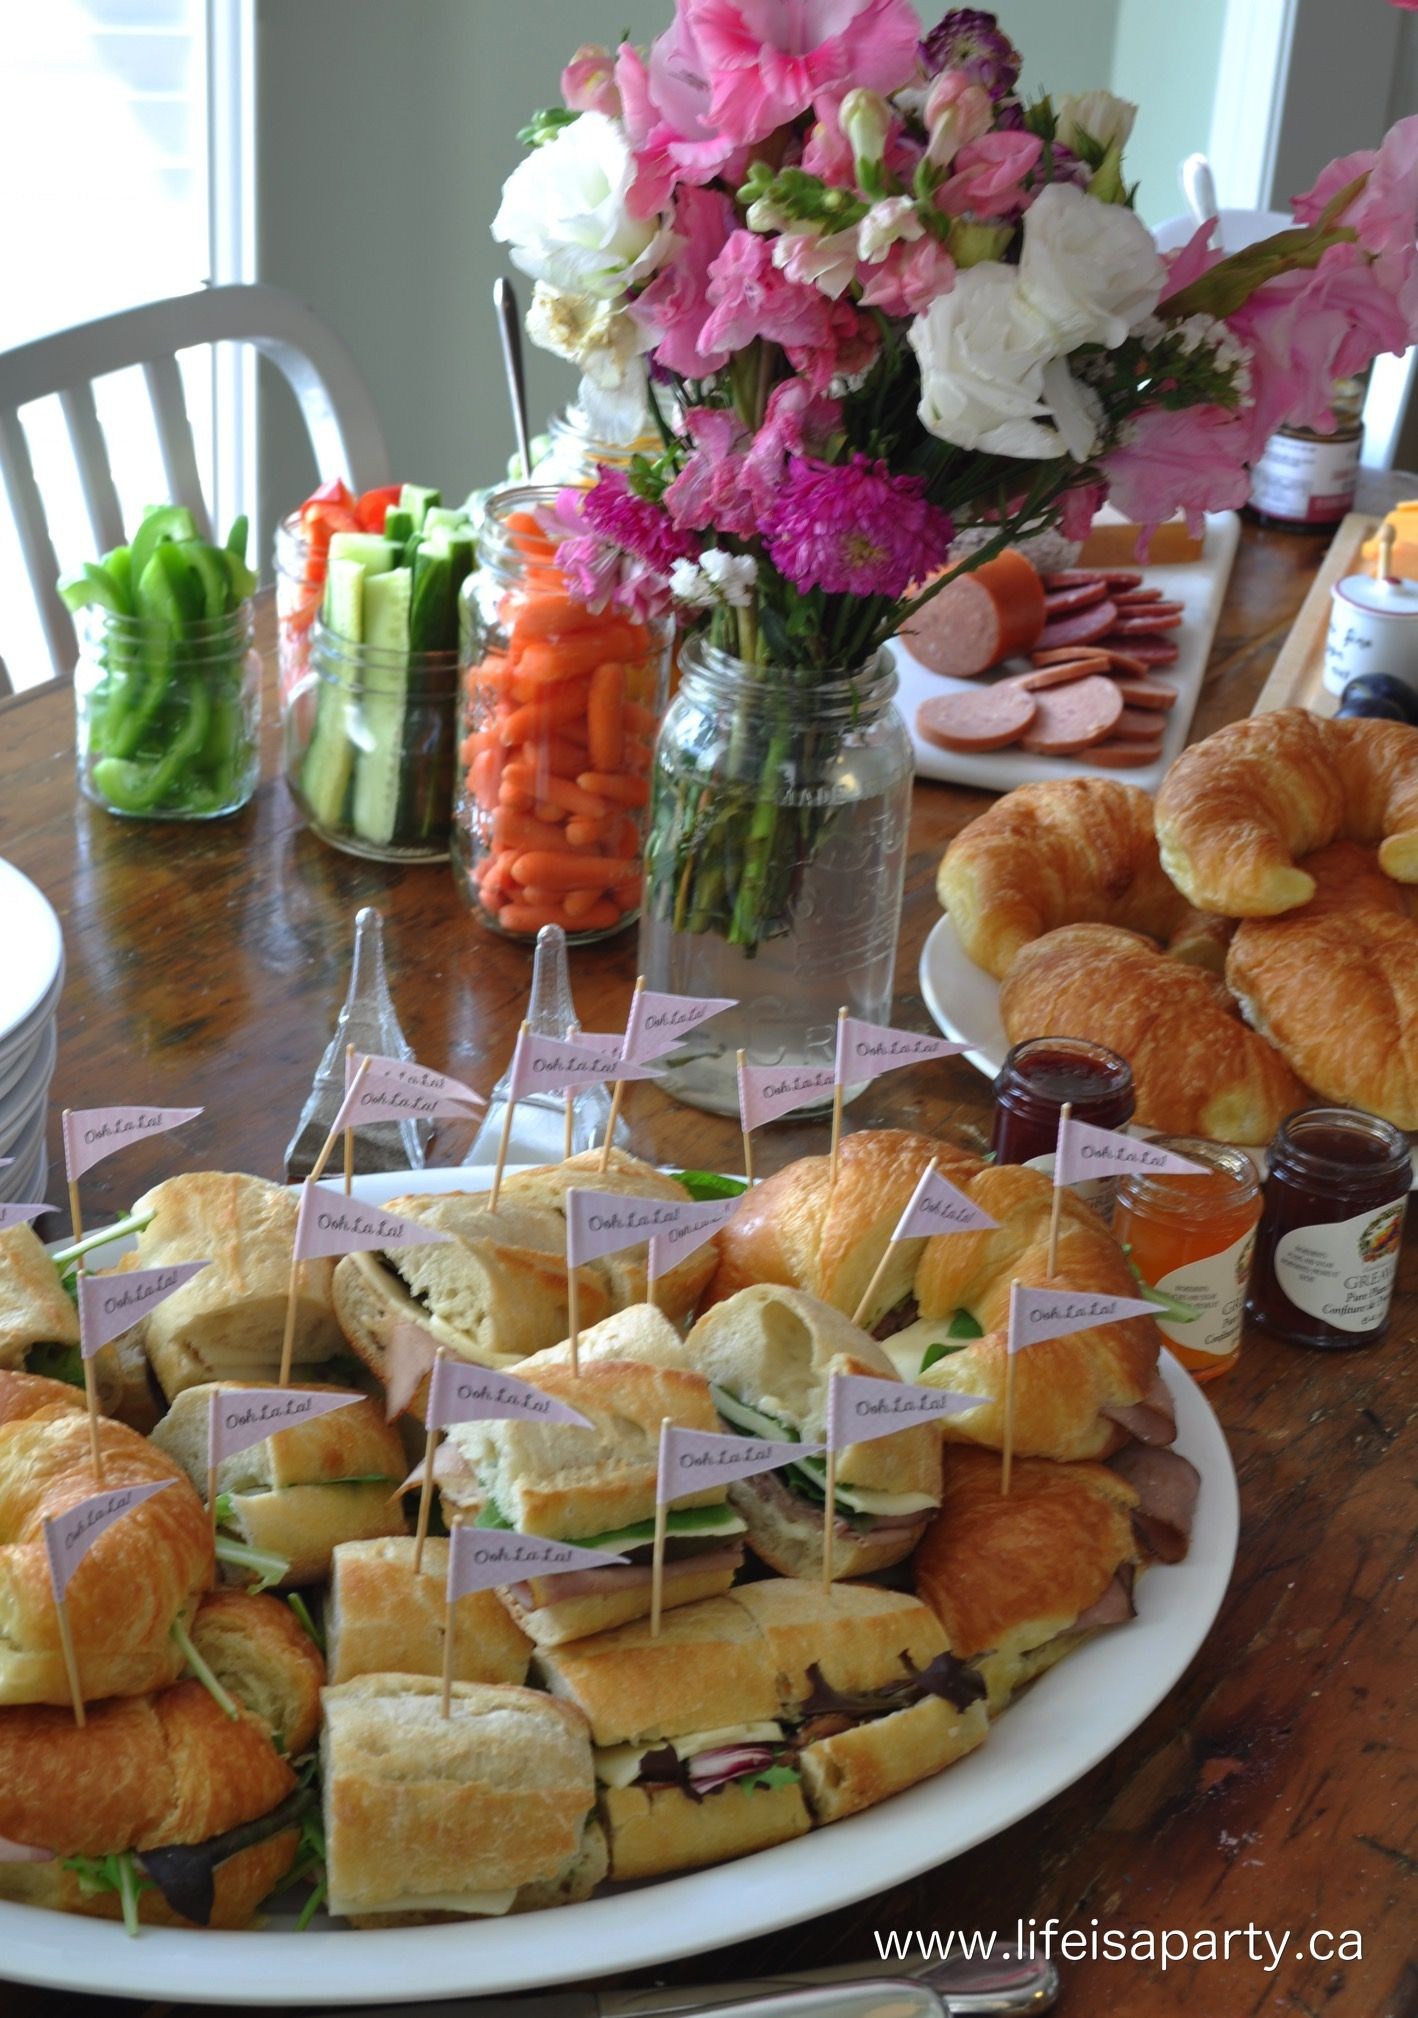 Food Themed Party Ideas
 Paris Party Food A French Themed Menu Great ideas of what